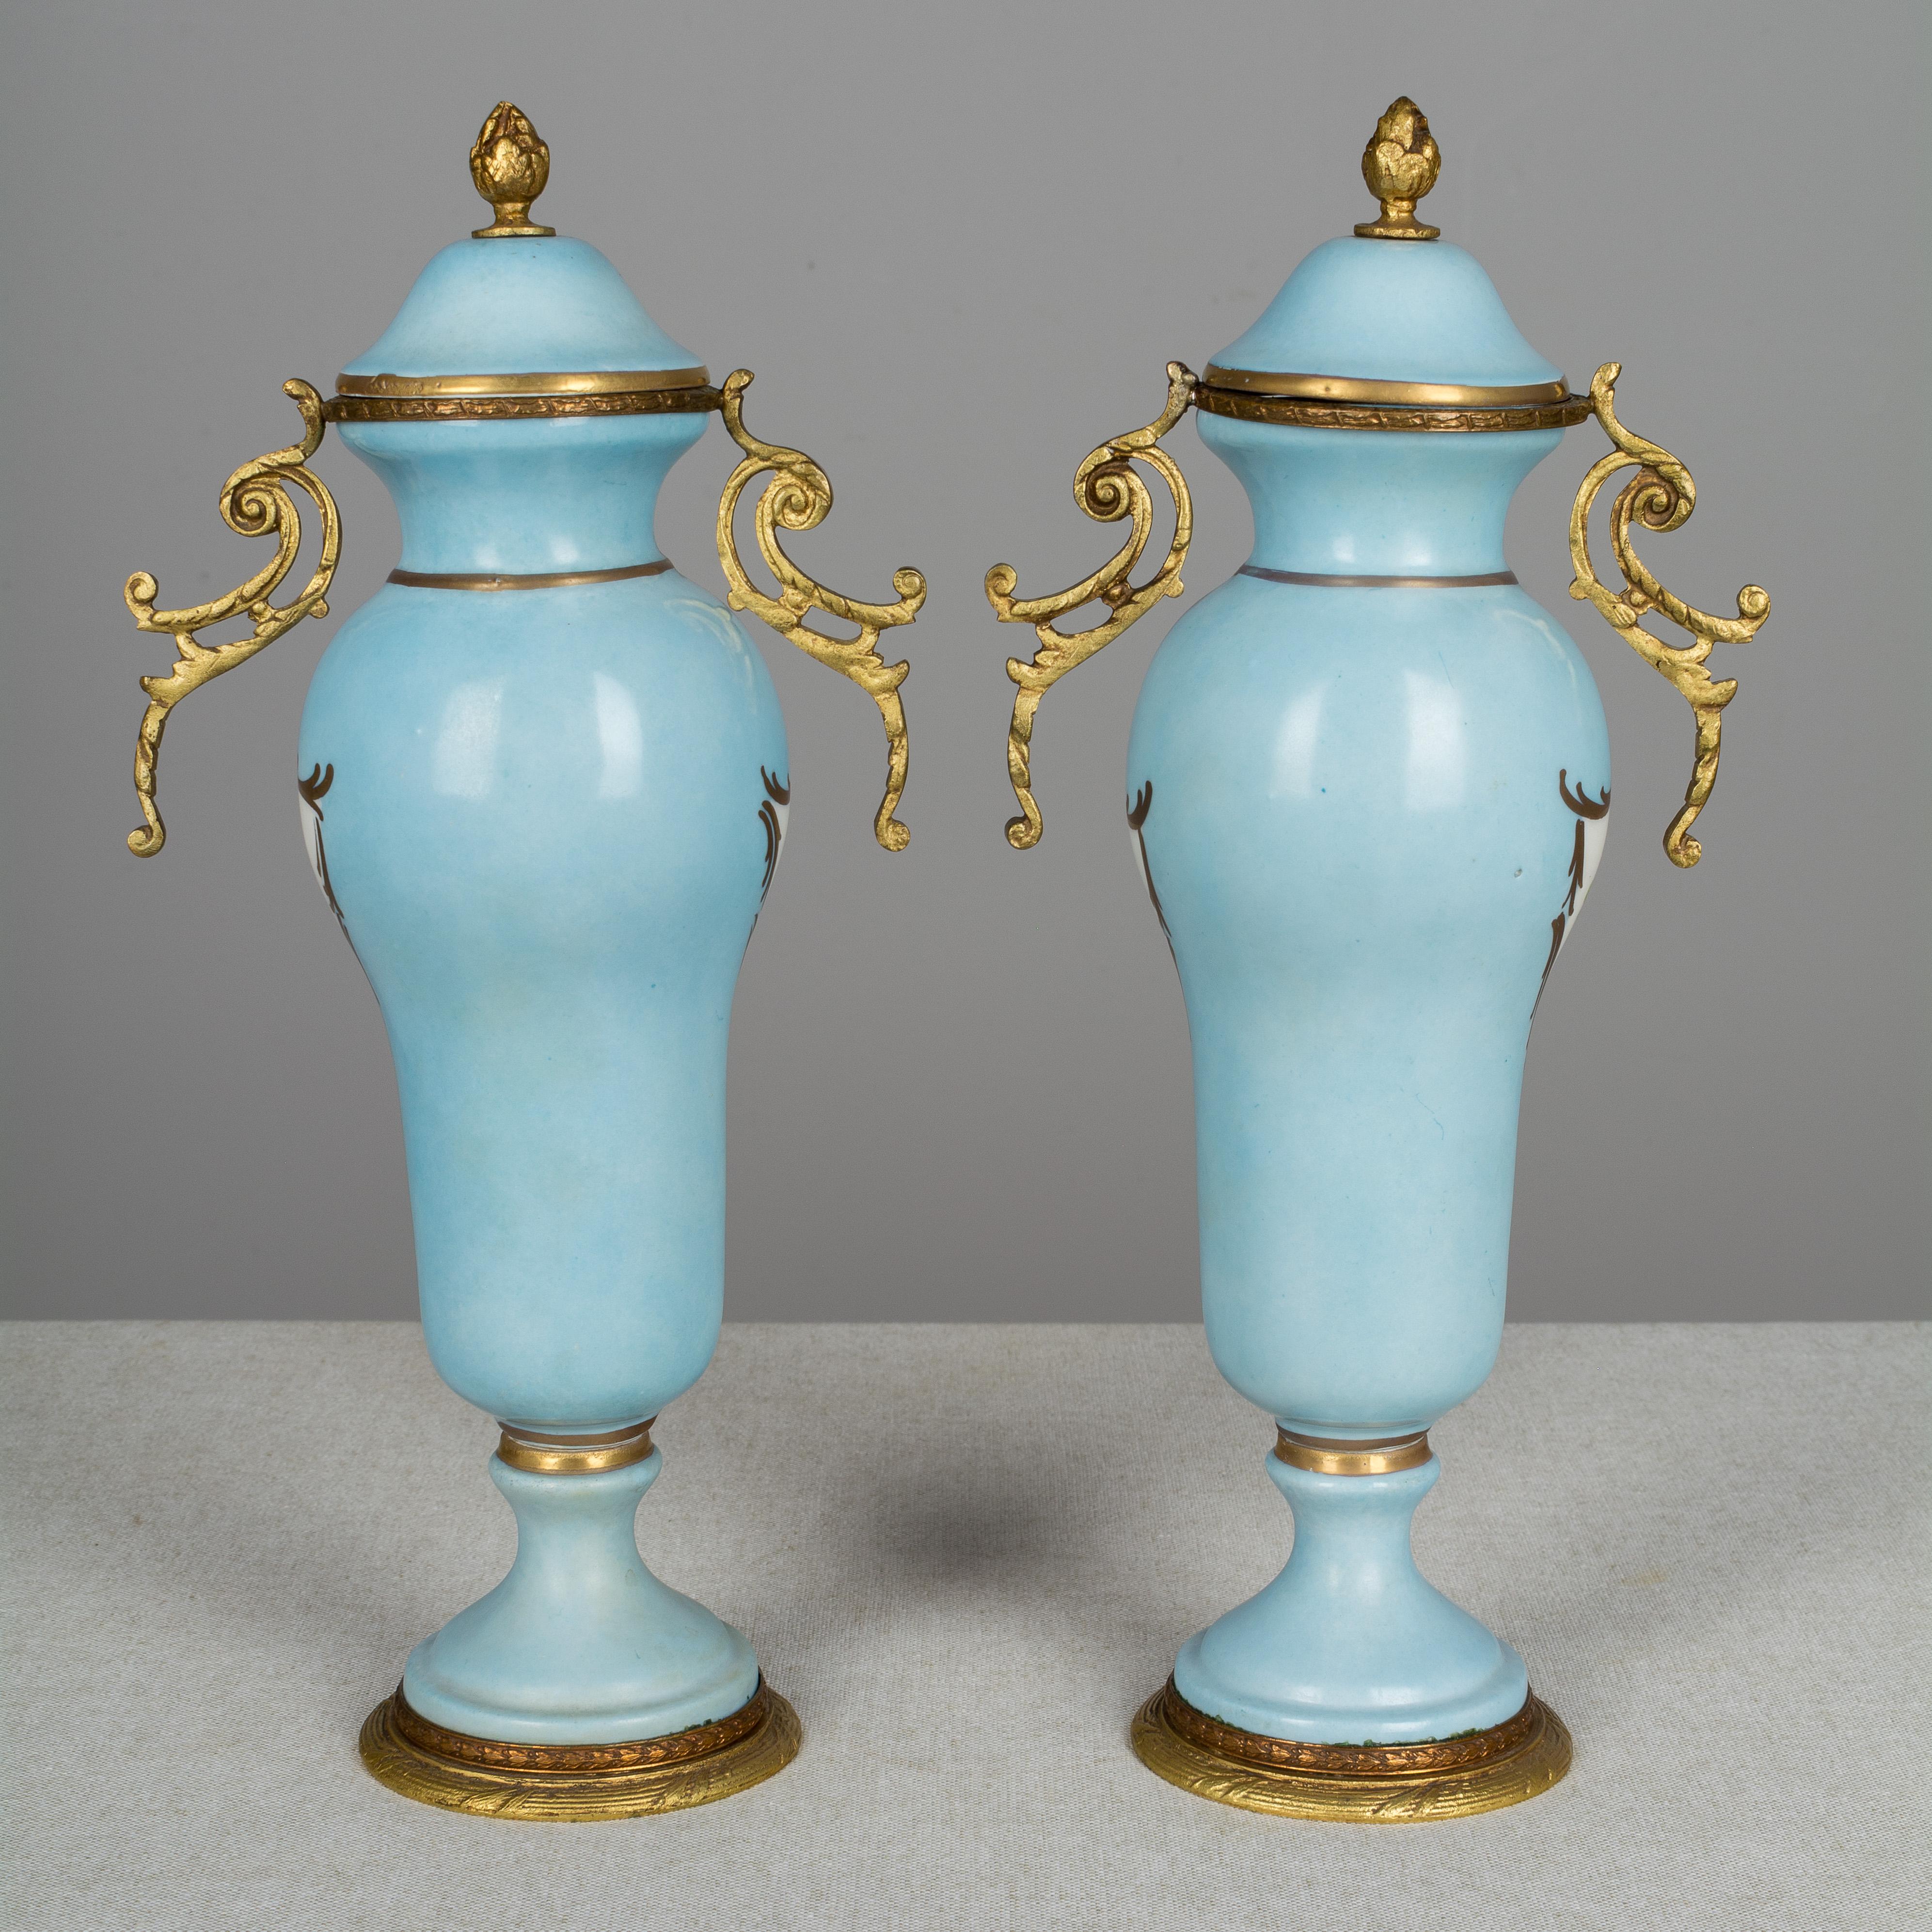 A pair of 19th century French Sèvres Porcelain bronze mounted urns, each with pastoral scenes on blue ground with hand painted gold accents. Marked on bottom.